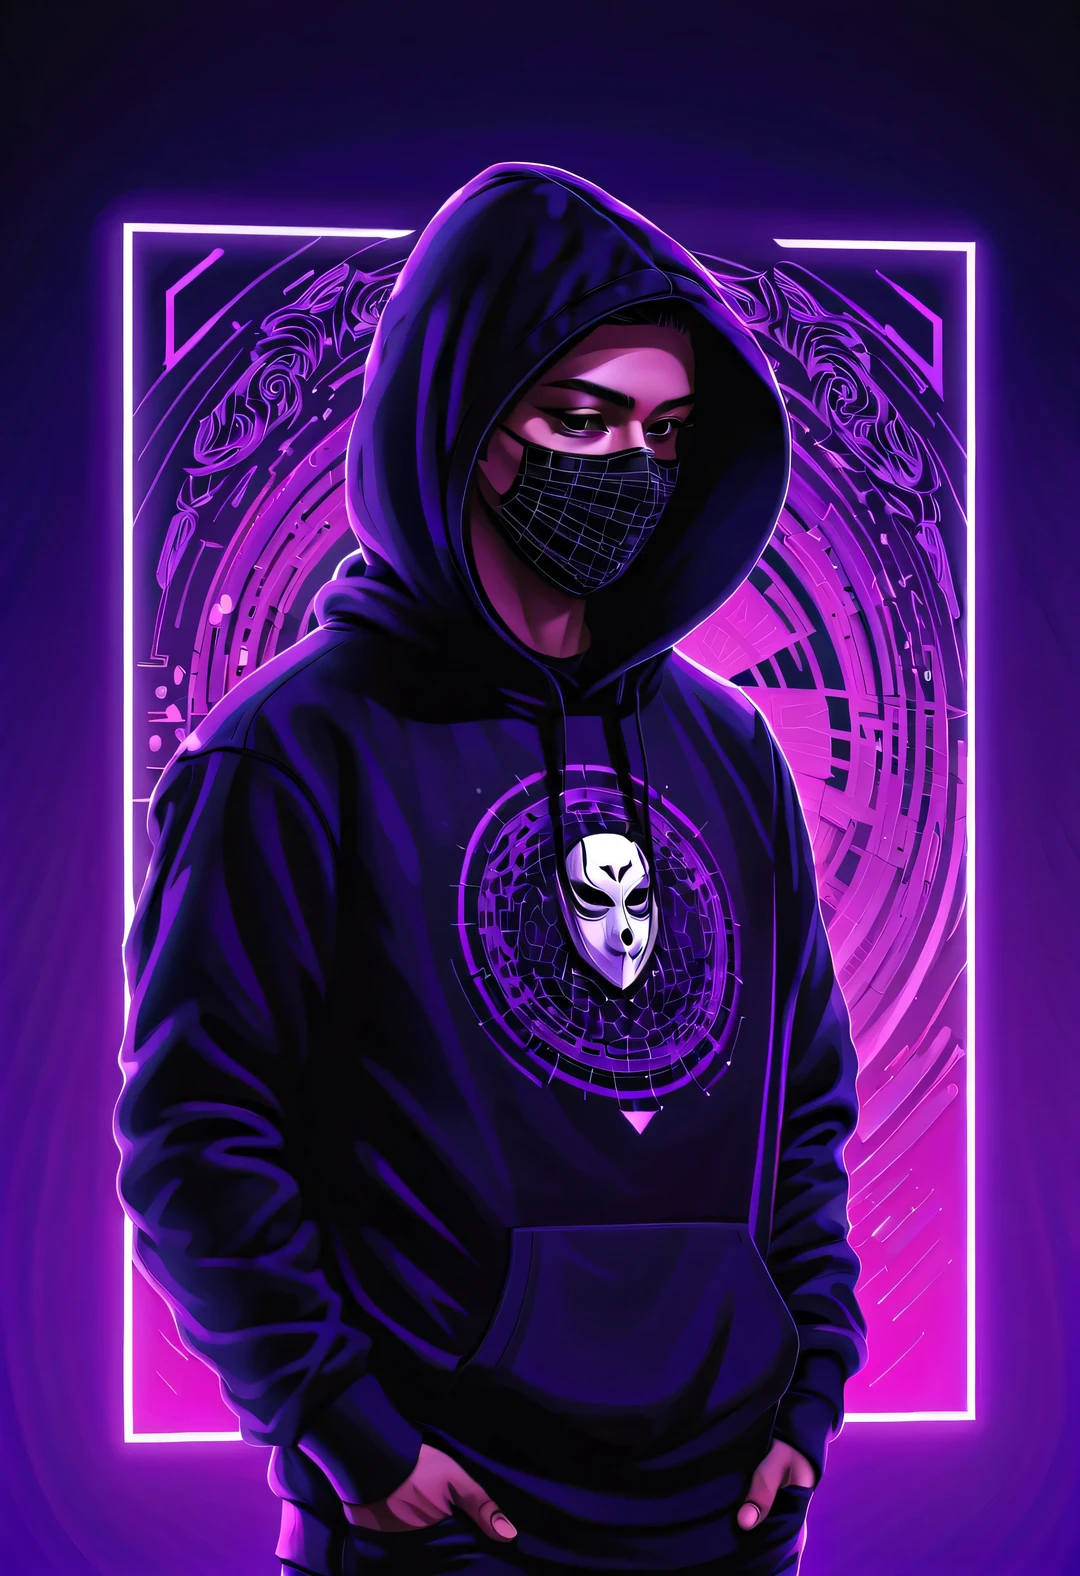 Vector illustration, Minimalism, number, vaporwave style, Beautiful and meticulous illustrations, A little more purple，
Hacker wearing black hoodie with raven pattern and face mask working in front, T-shirt design, dramatic lighting, Trends on ArtStation, Award-winning, Icons are very detailed